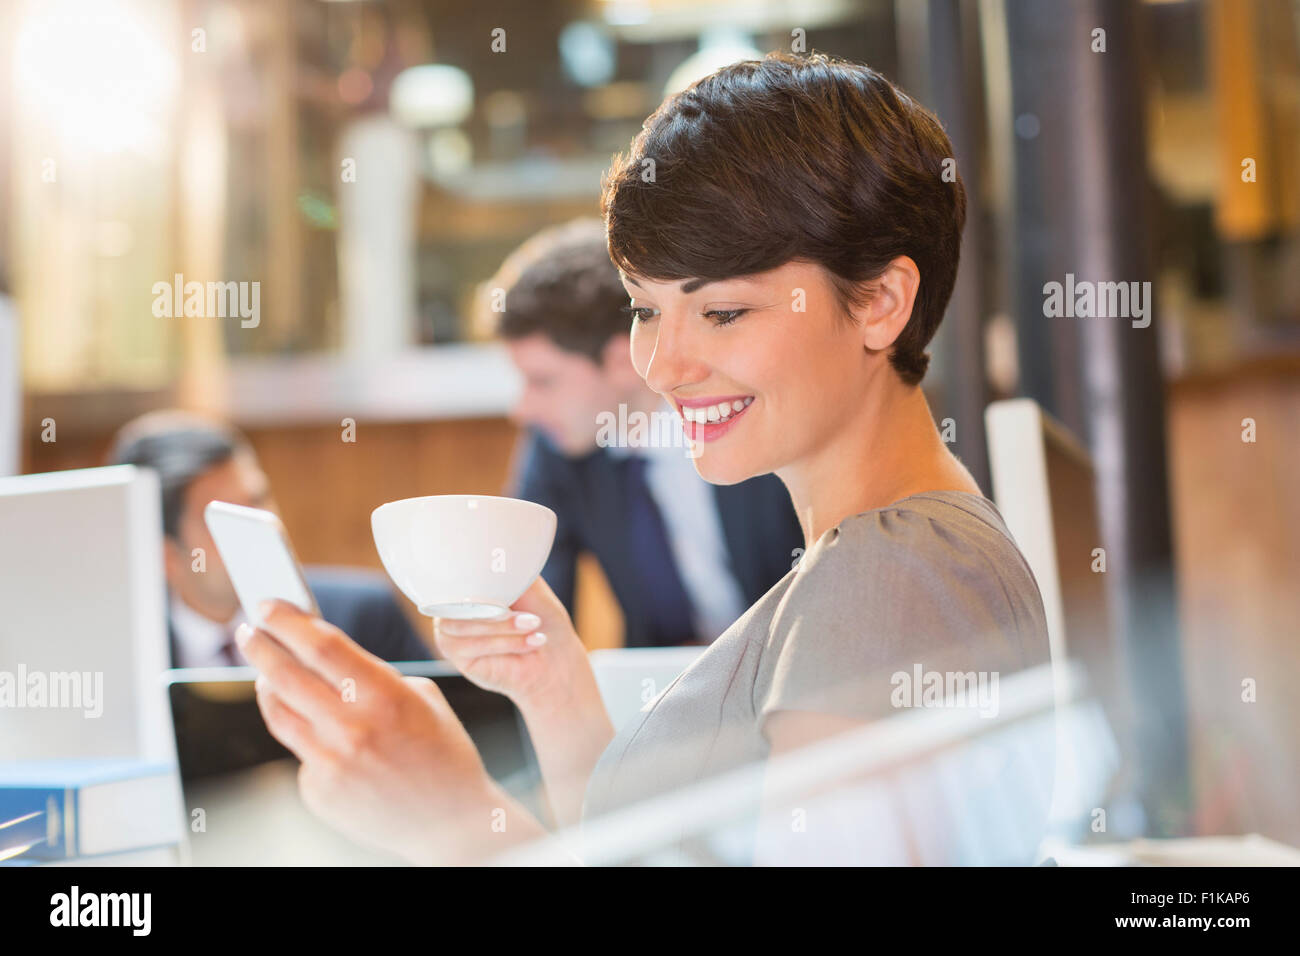 Businesswoman drinking coffee and texting with cell phone in office Stock Photo